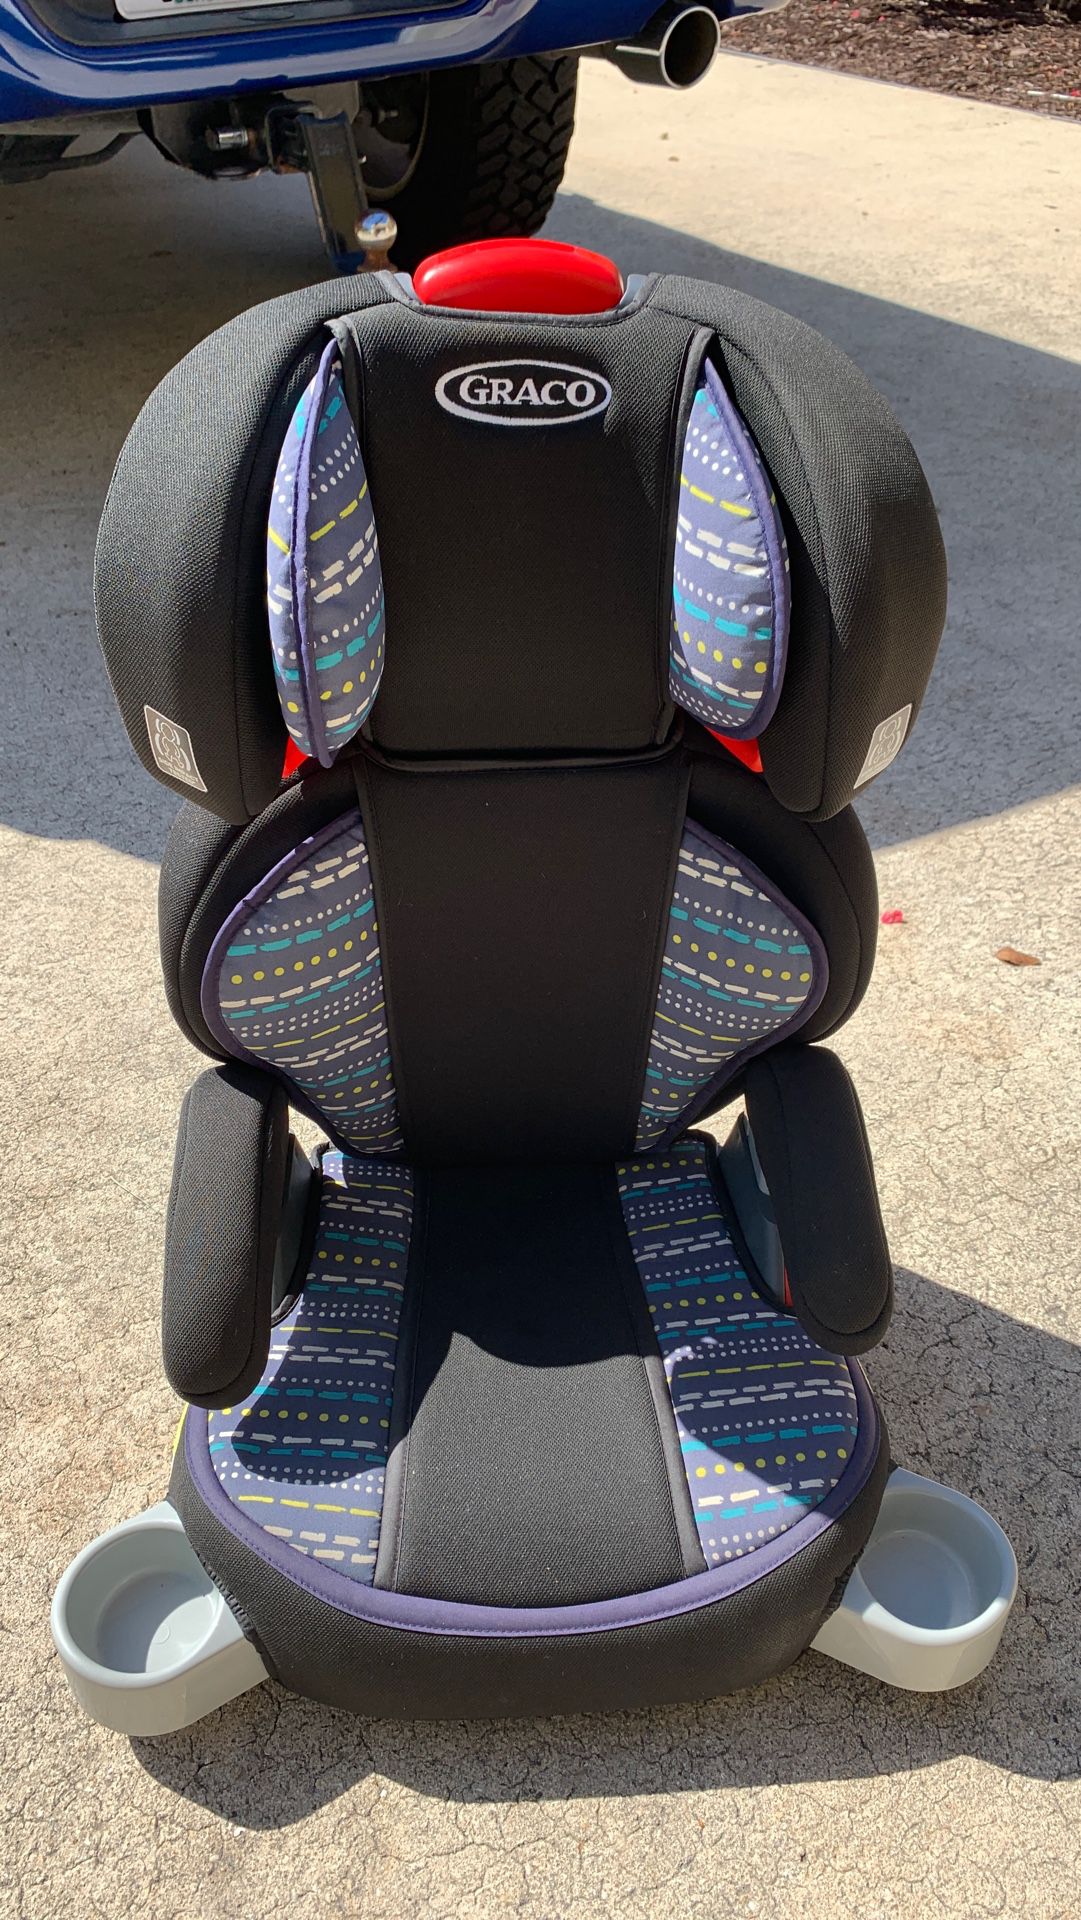 GRACO booster seat!